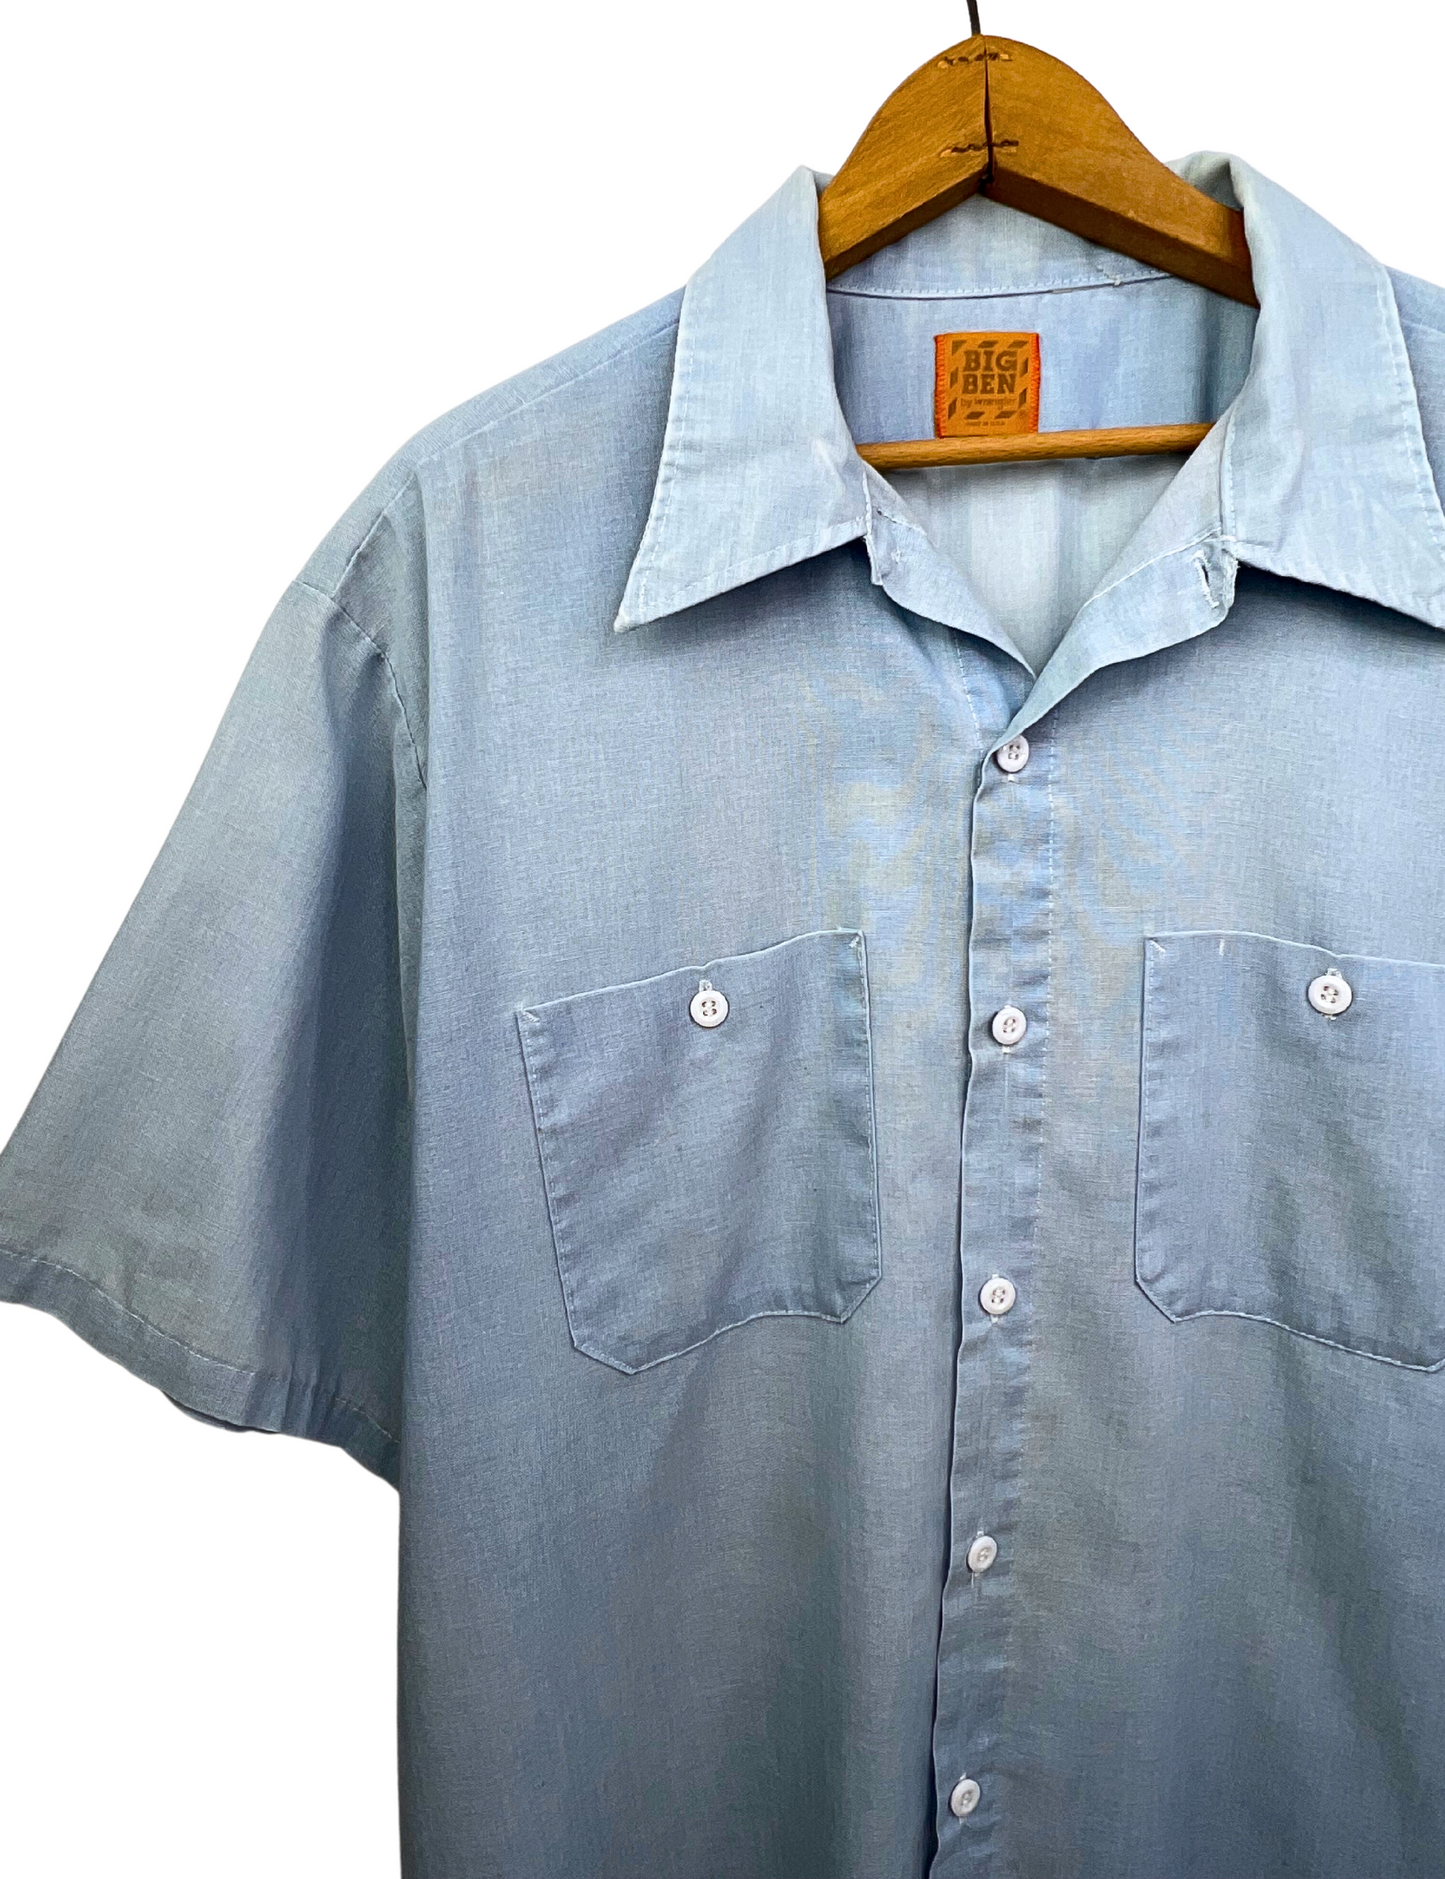 70’s Chambray Workwear Big Ben by Wrangler Buttonup Size XL